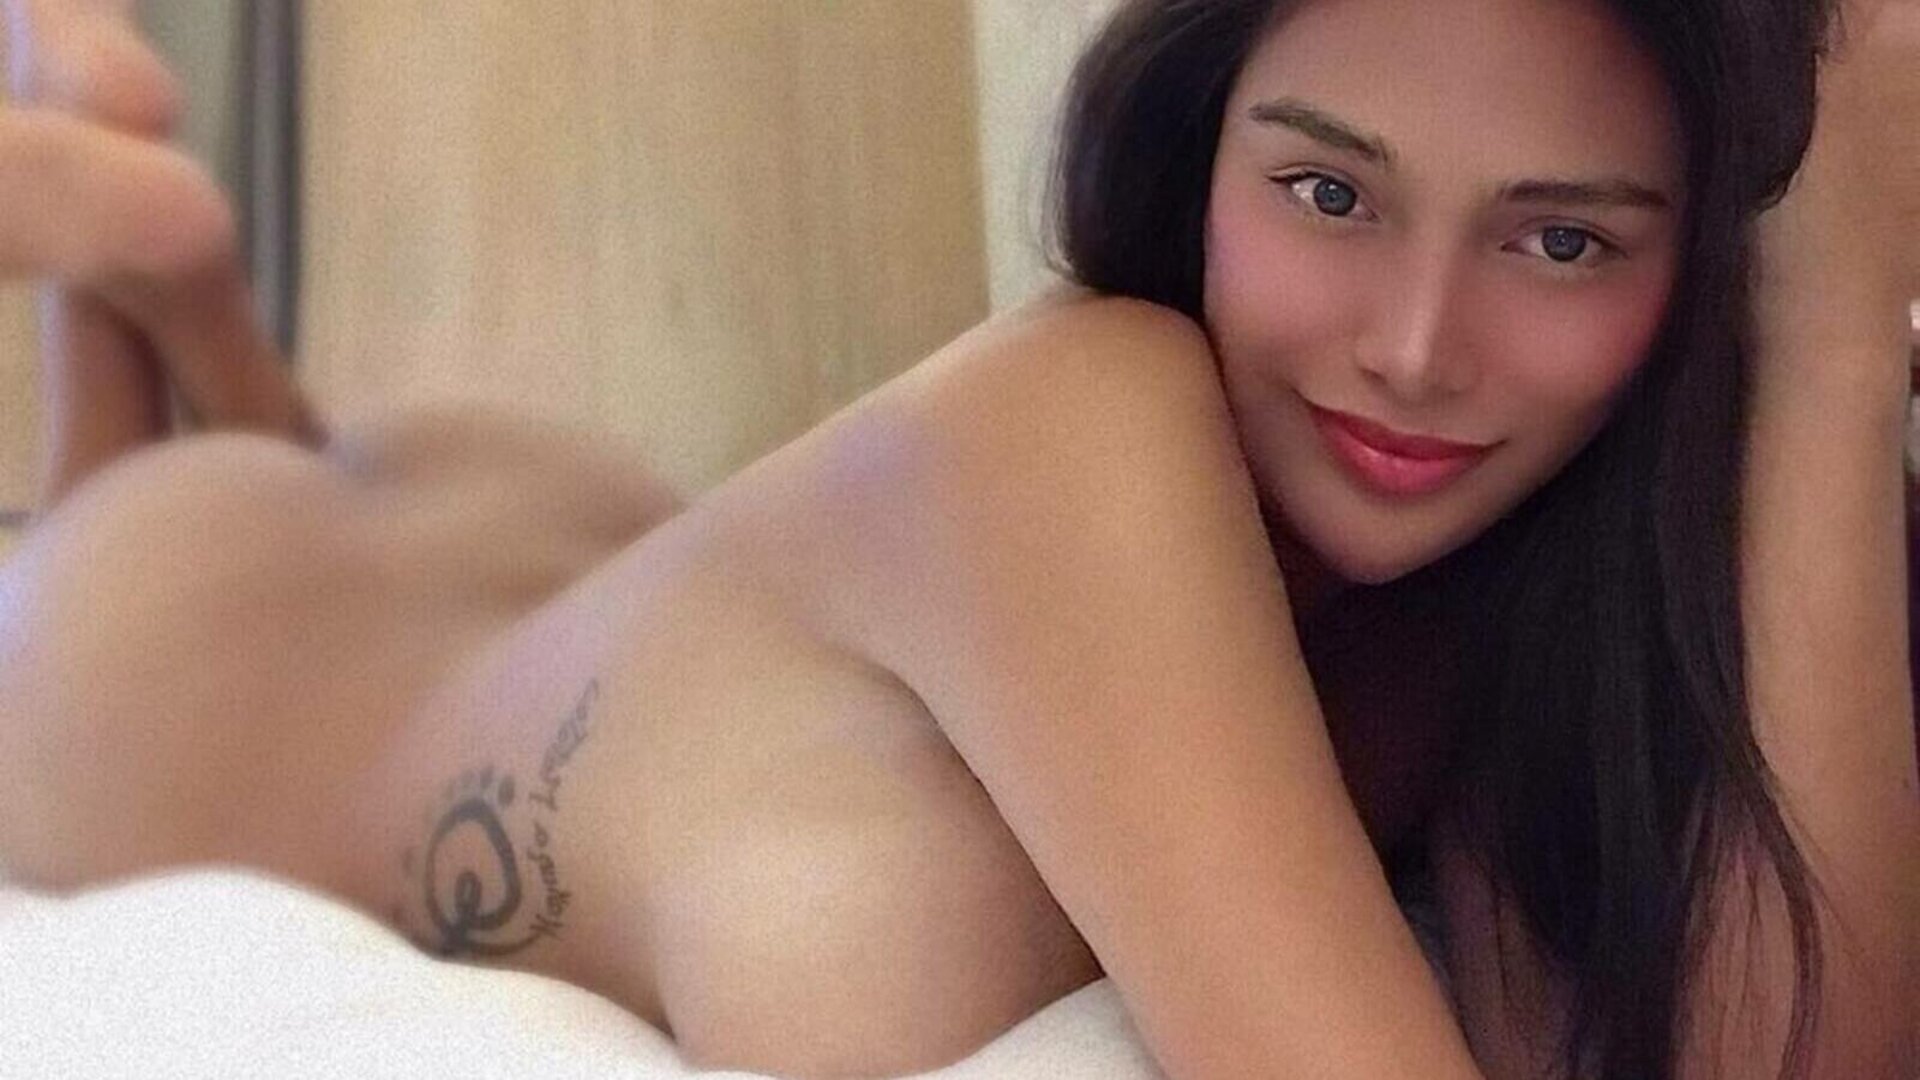 AayahBermudez's Live Nude Chat